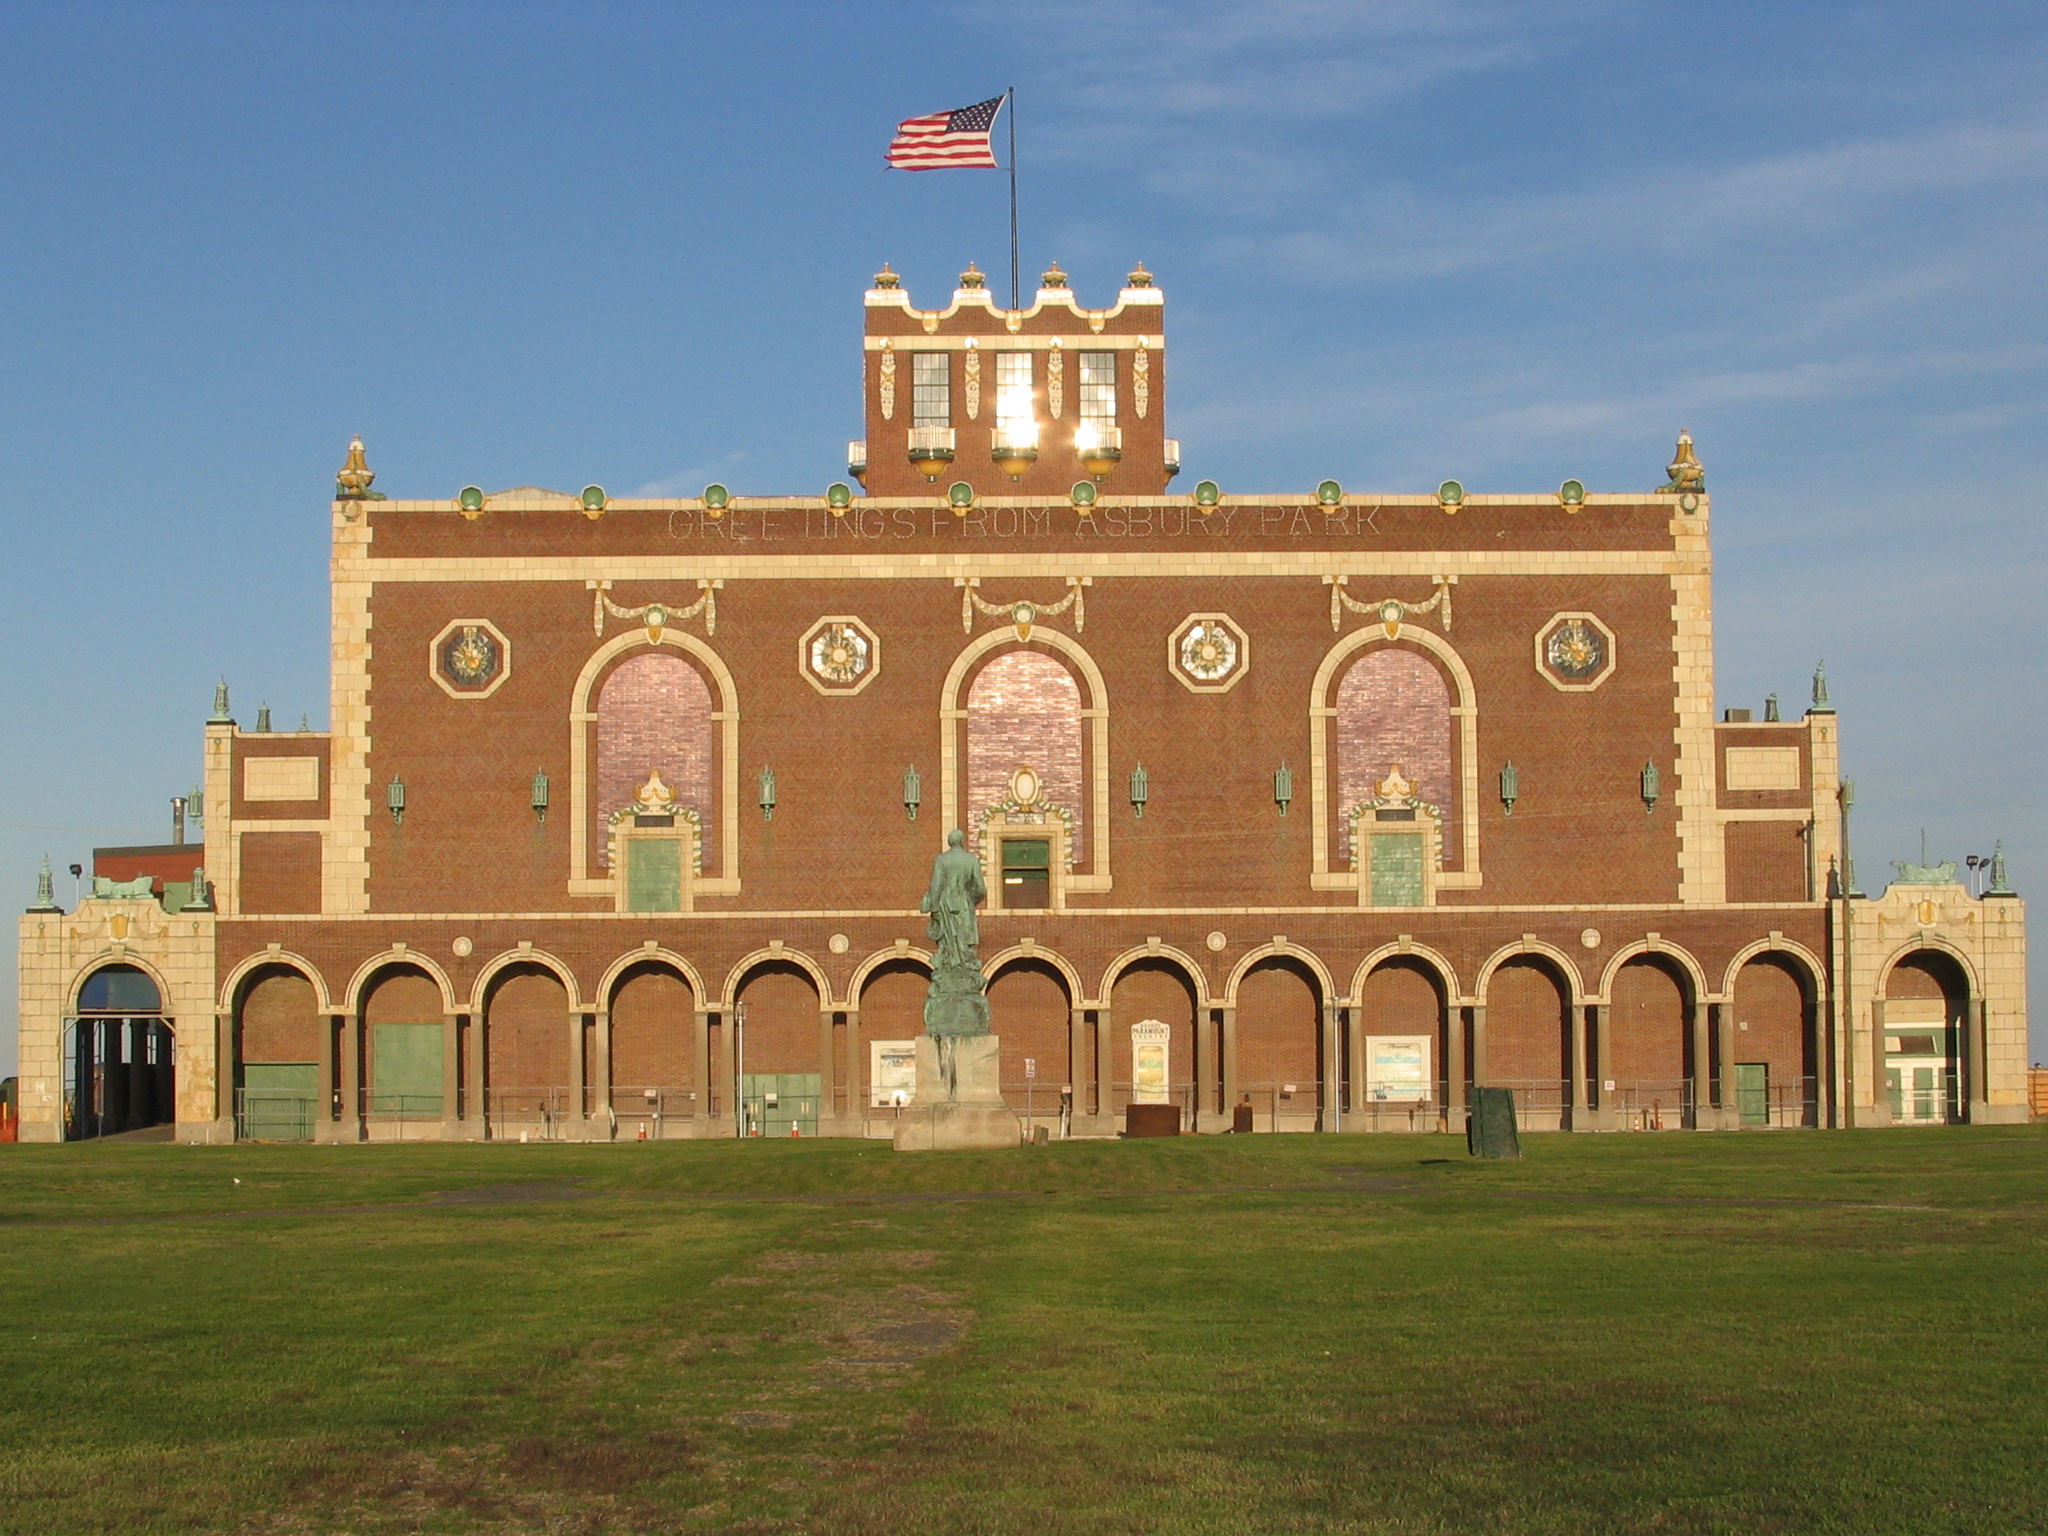 Asbury Park Convention Hall - Wikipedia